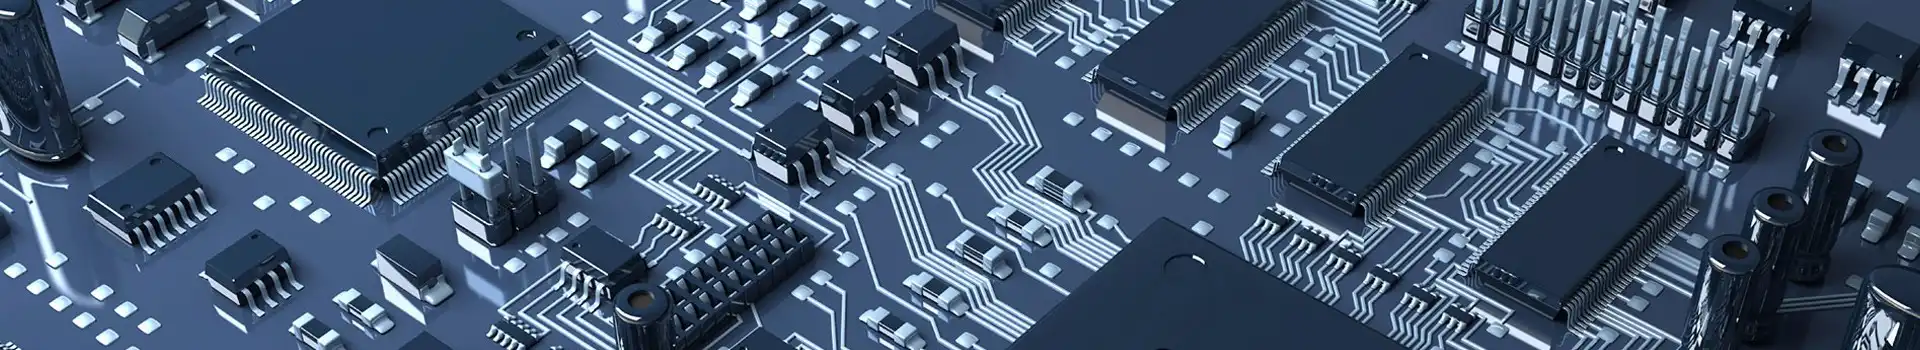 What Are the Advantages of Printed Circuit Boards?